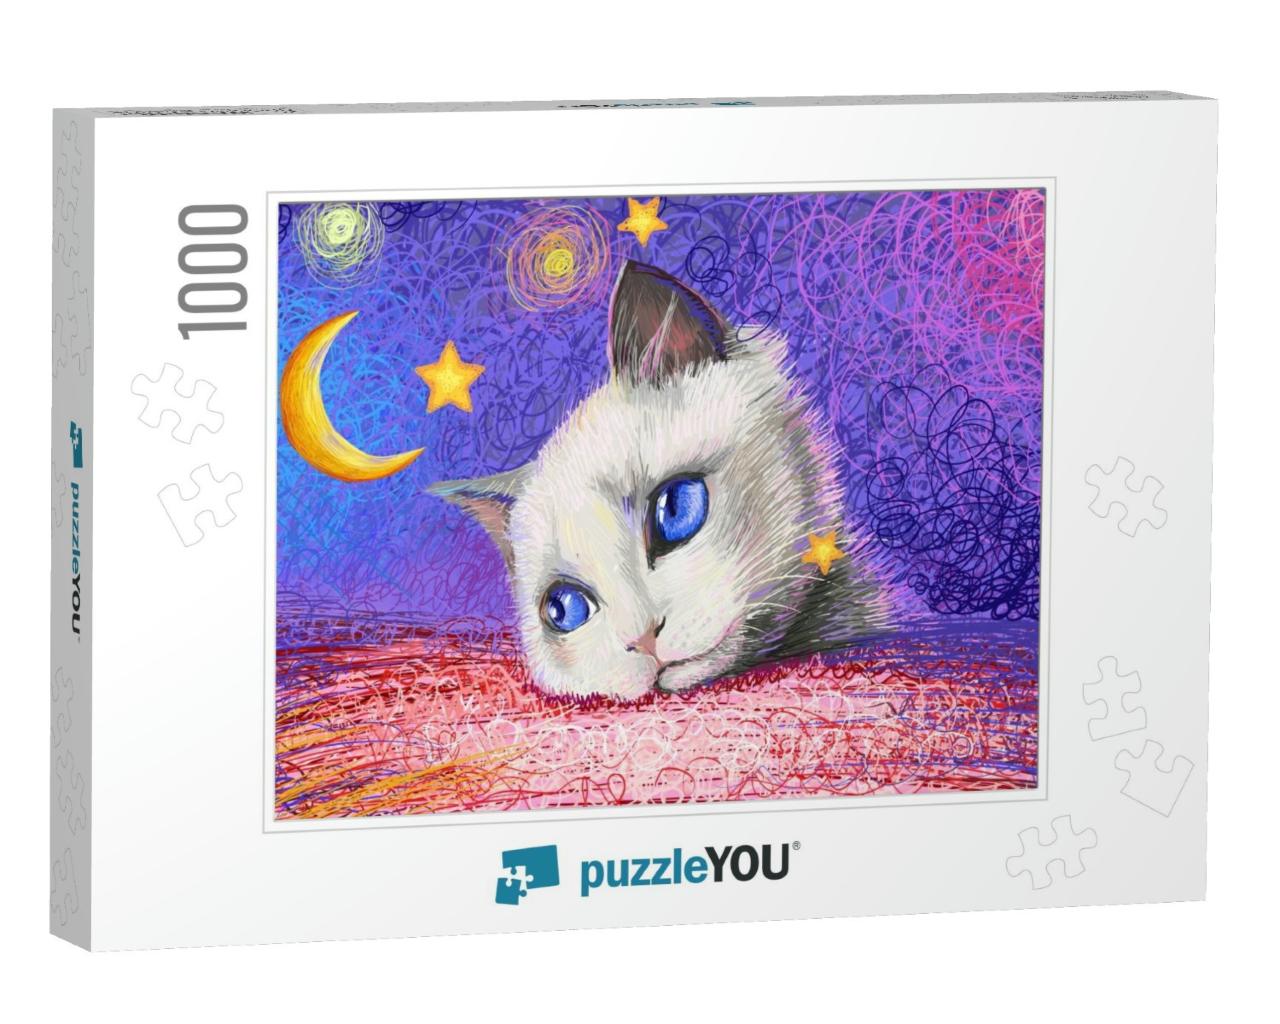 Drawn Illustration of a White Cat Head on a Bright Backgr... Jigsaw Puzzle with 1000 pieces